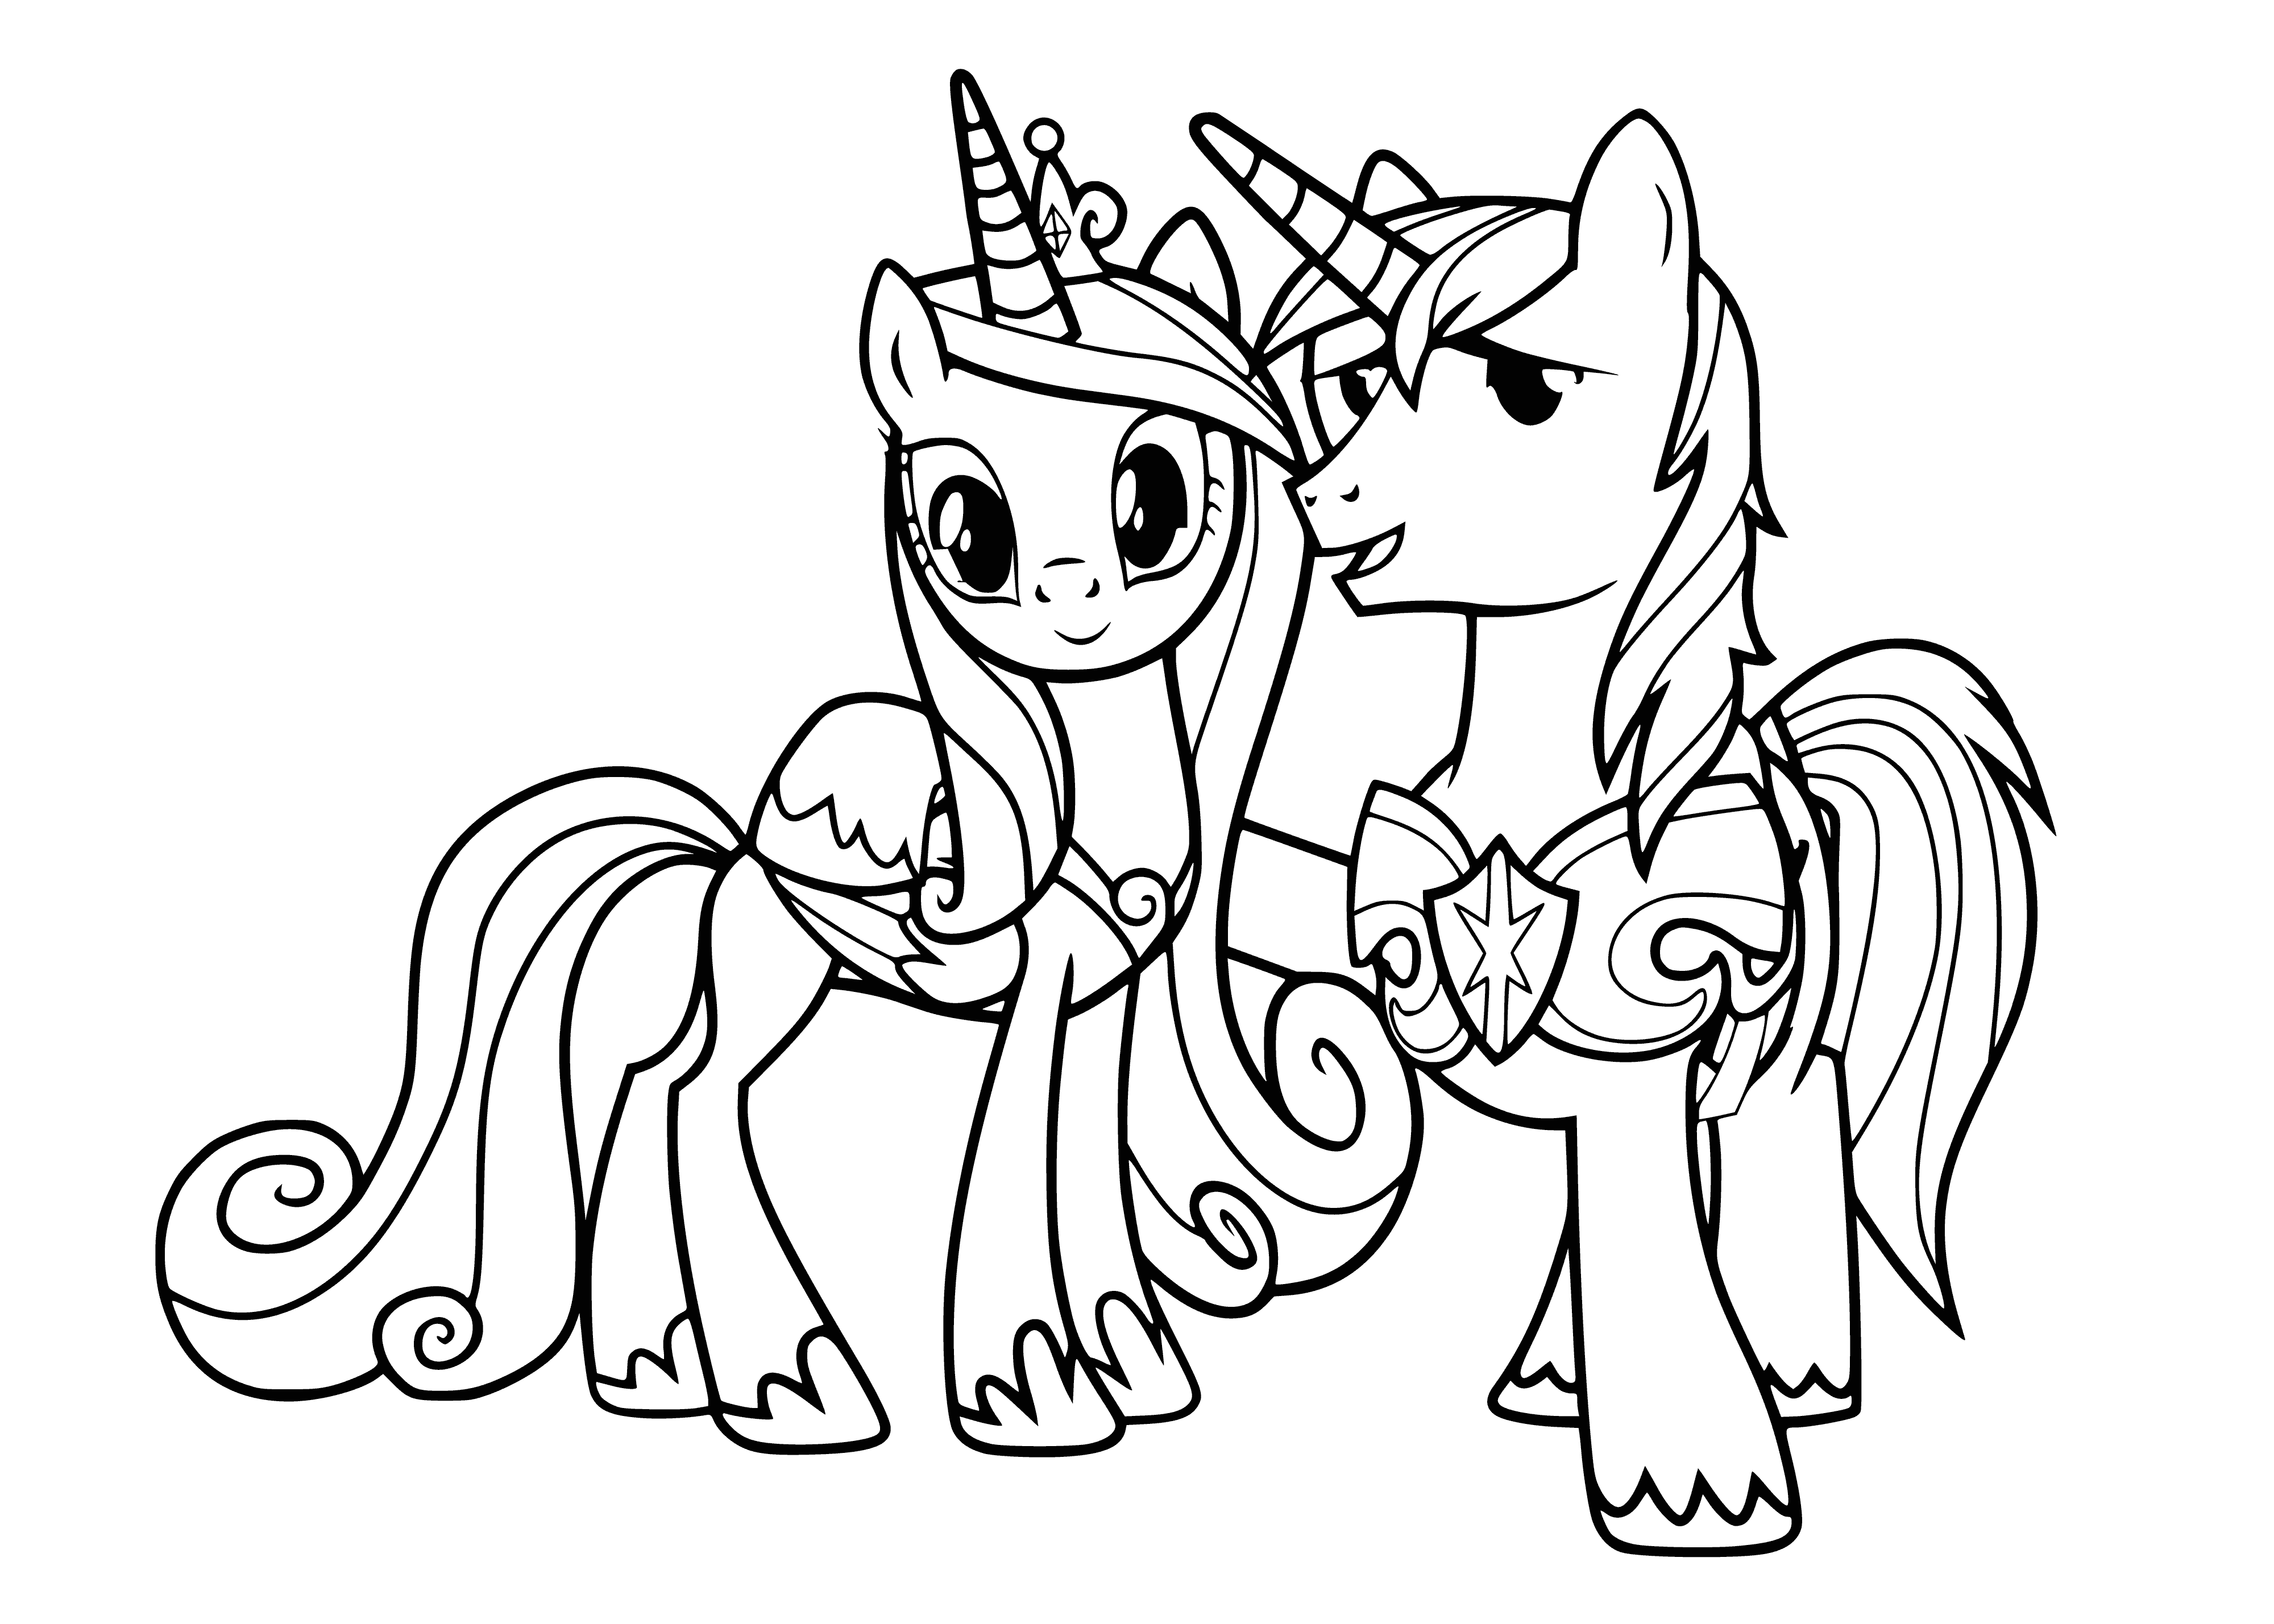 Princess Cadance and her husband Shining Armor stand together in regal attire. She has a pink crown and curly locks, he with blue mane and silver armor. They both look happy and kind.